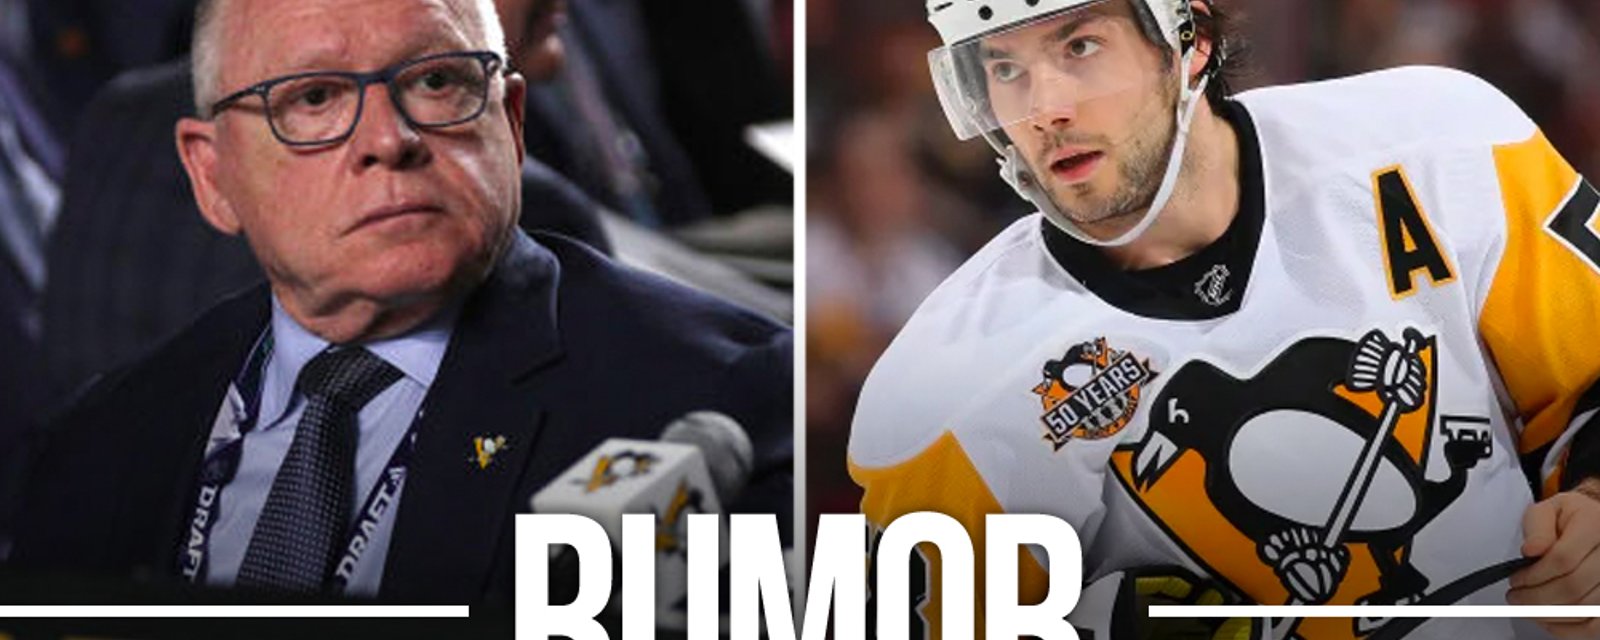 Report: Rutherford quit Penguins over botched Letang trade